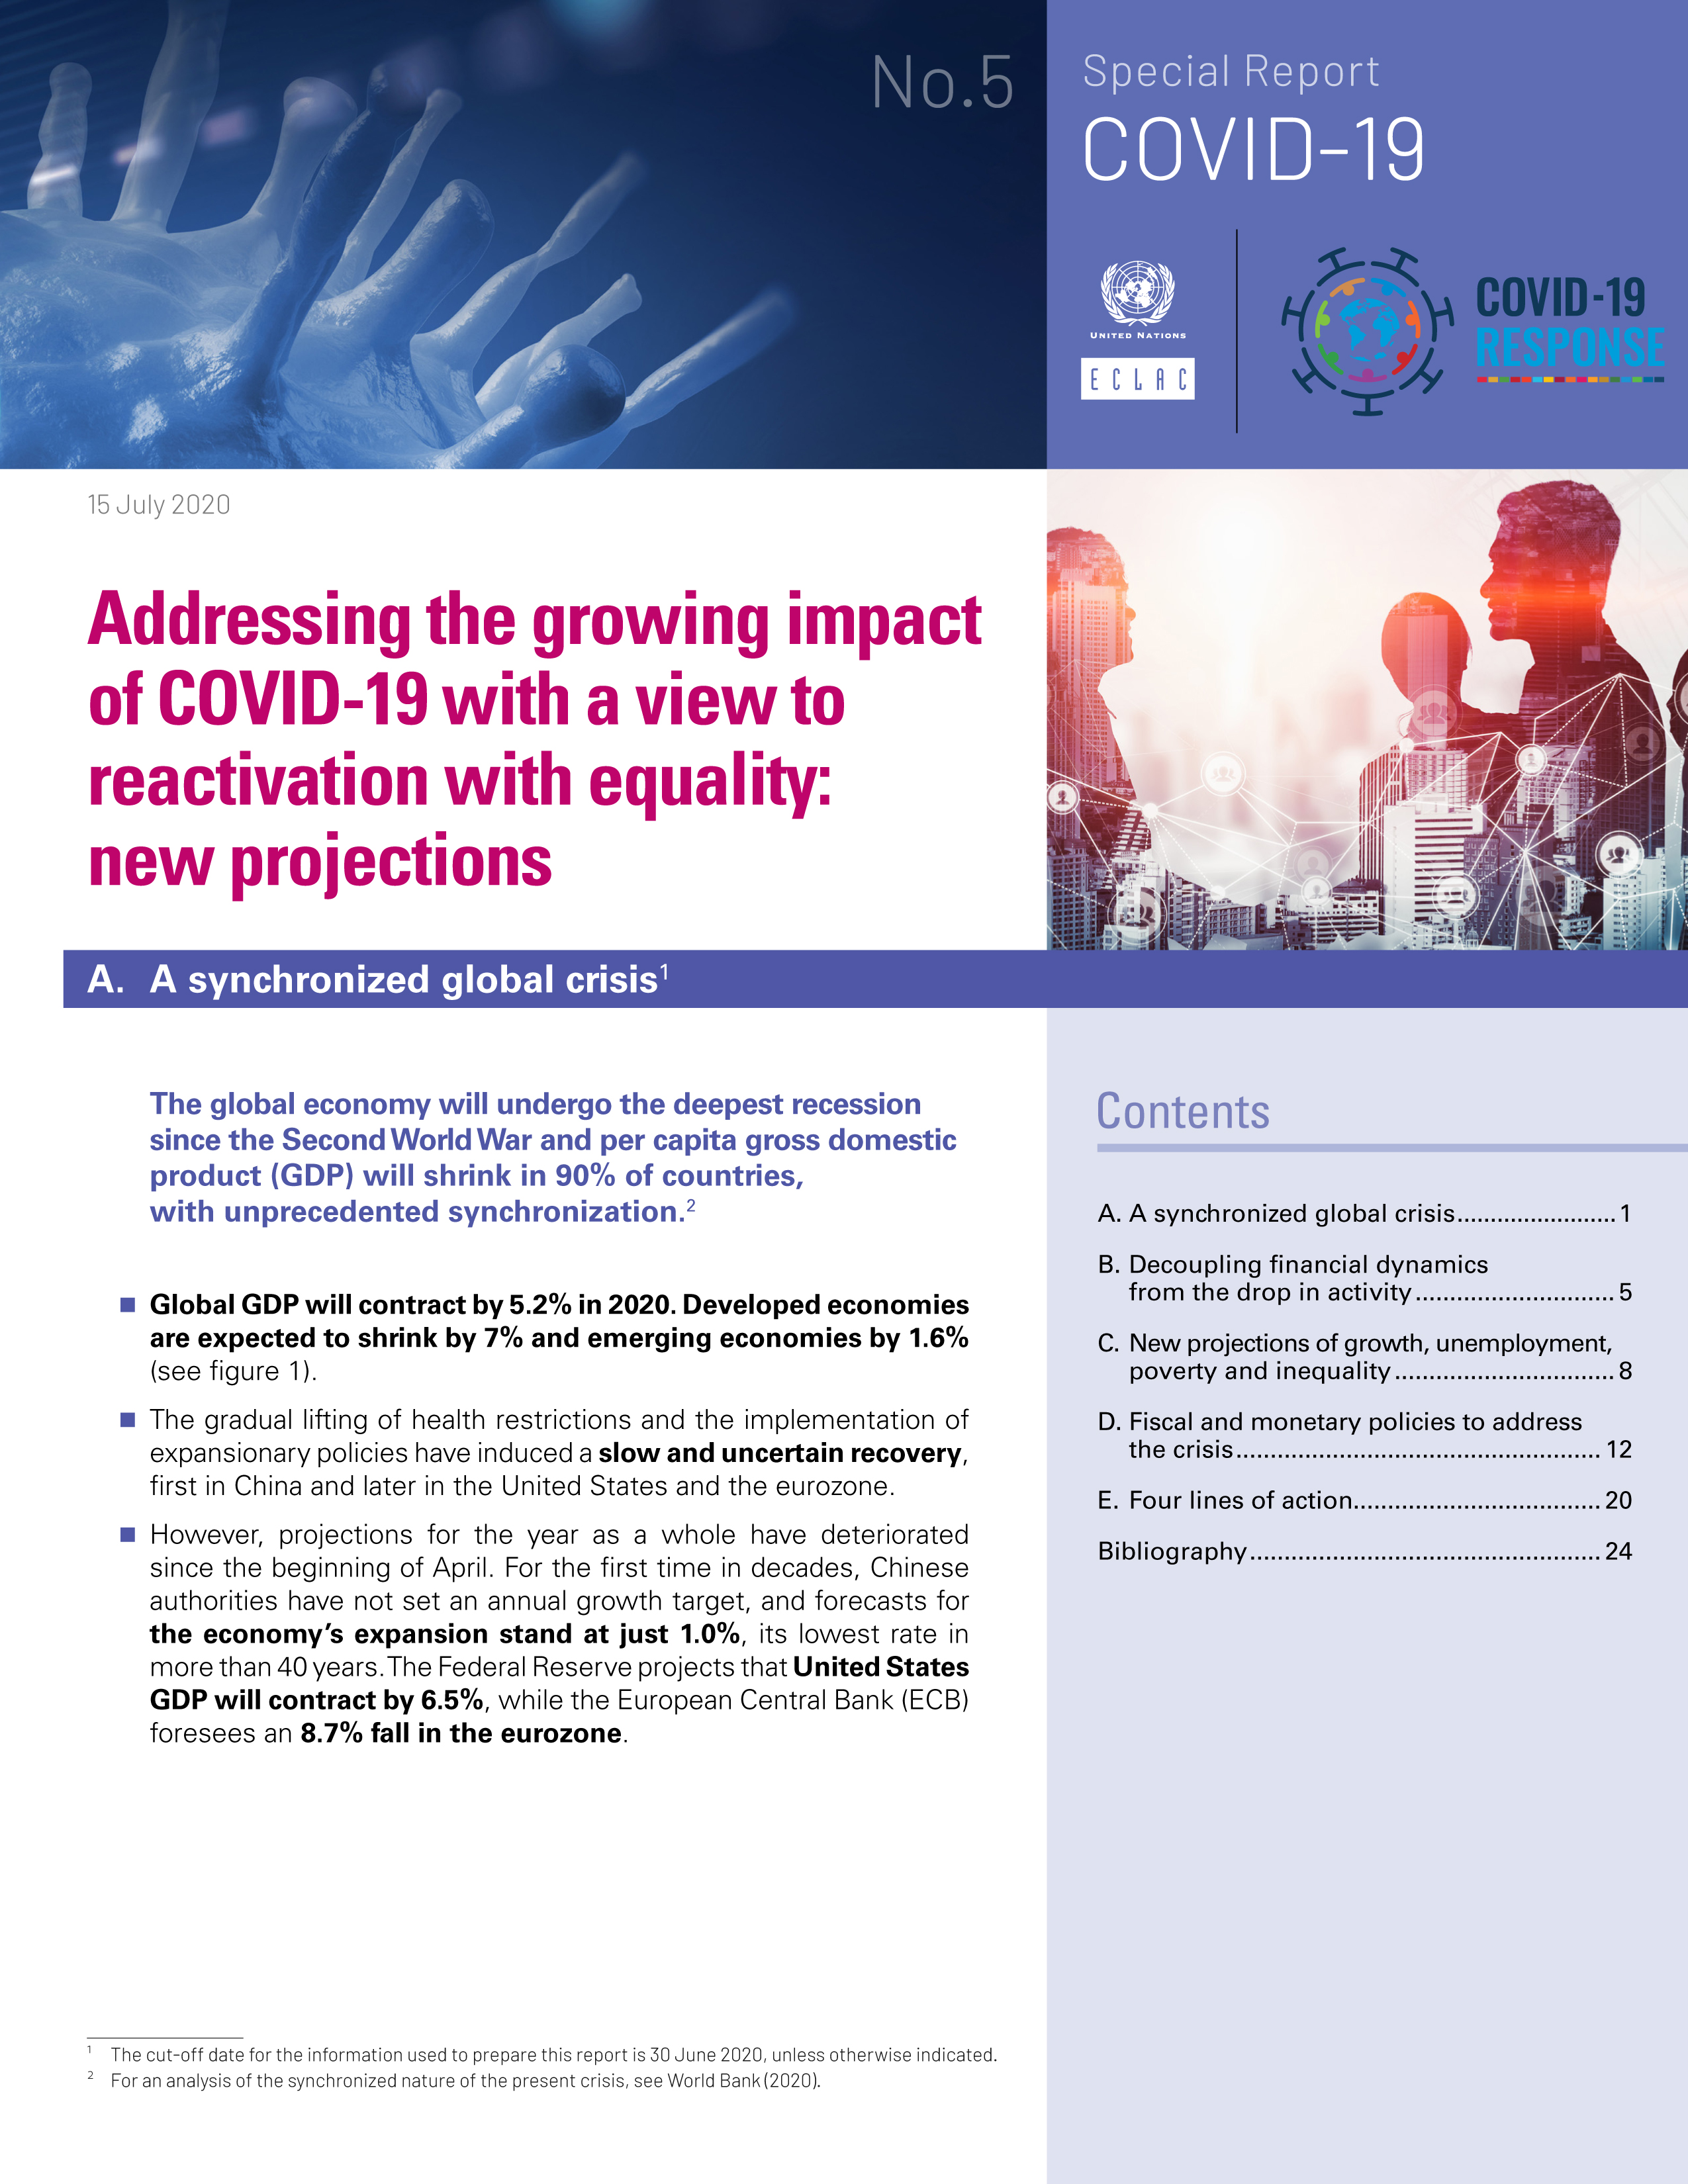 image of Addressing the Growing Impact of COVID-19 with a View to Reactivation with Equality: New Projections